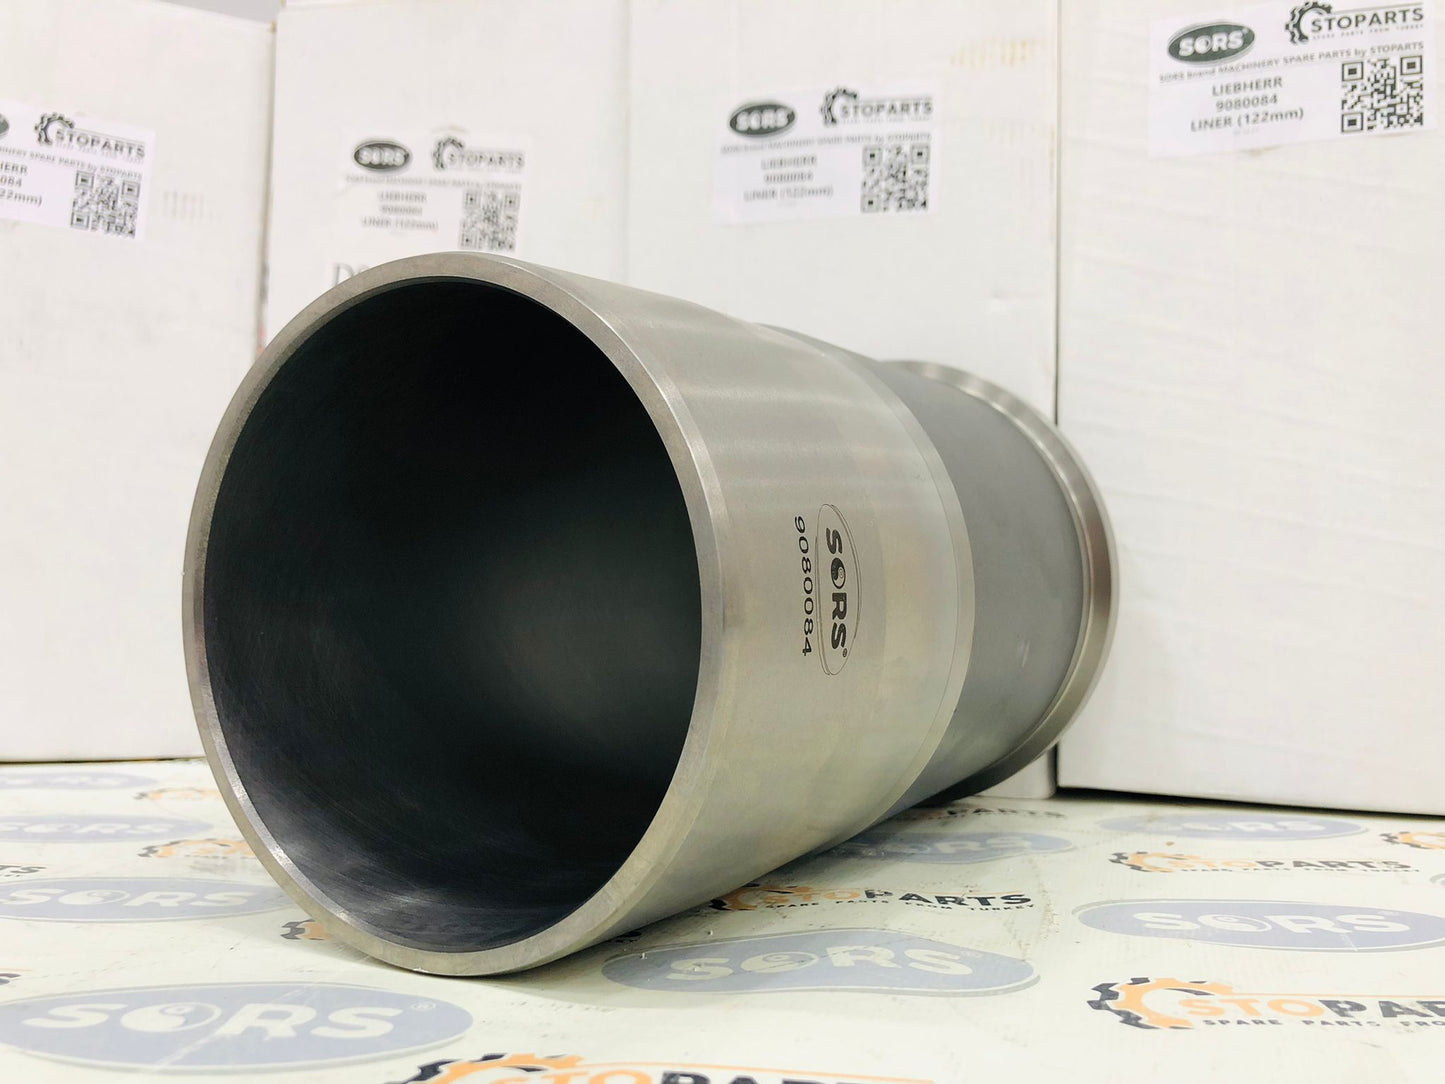 ENGINE LINERS 9080084 (122mm) FOR LIEBHERR